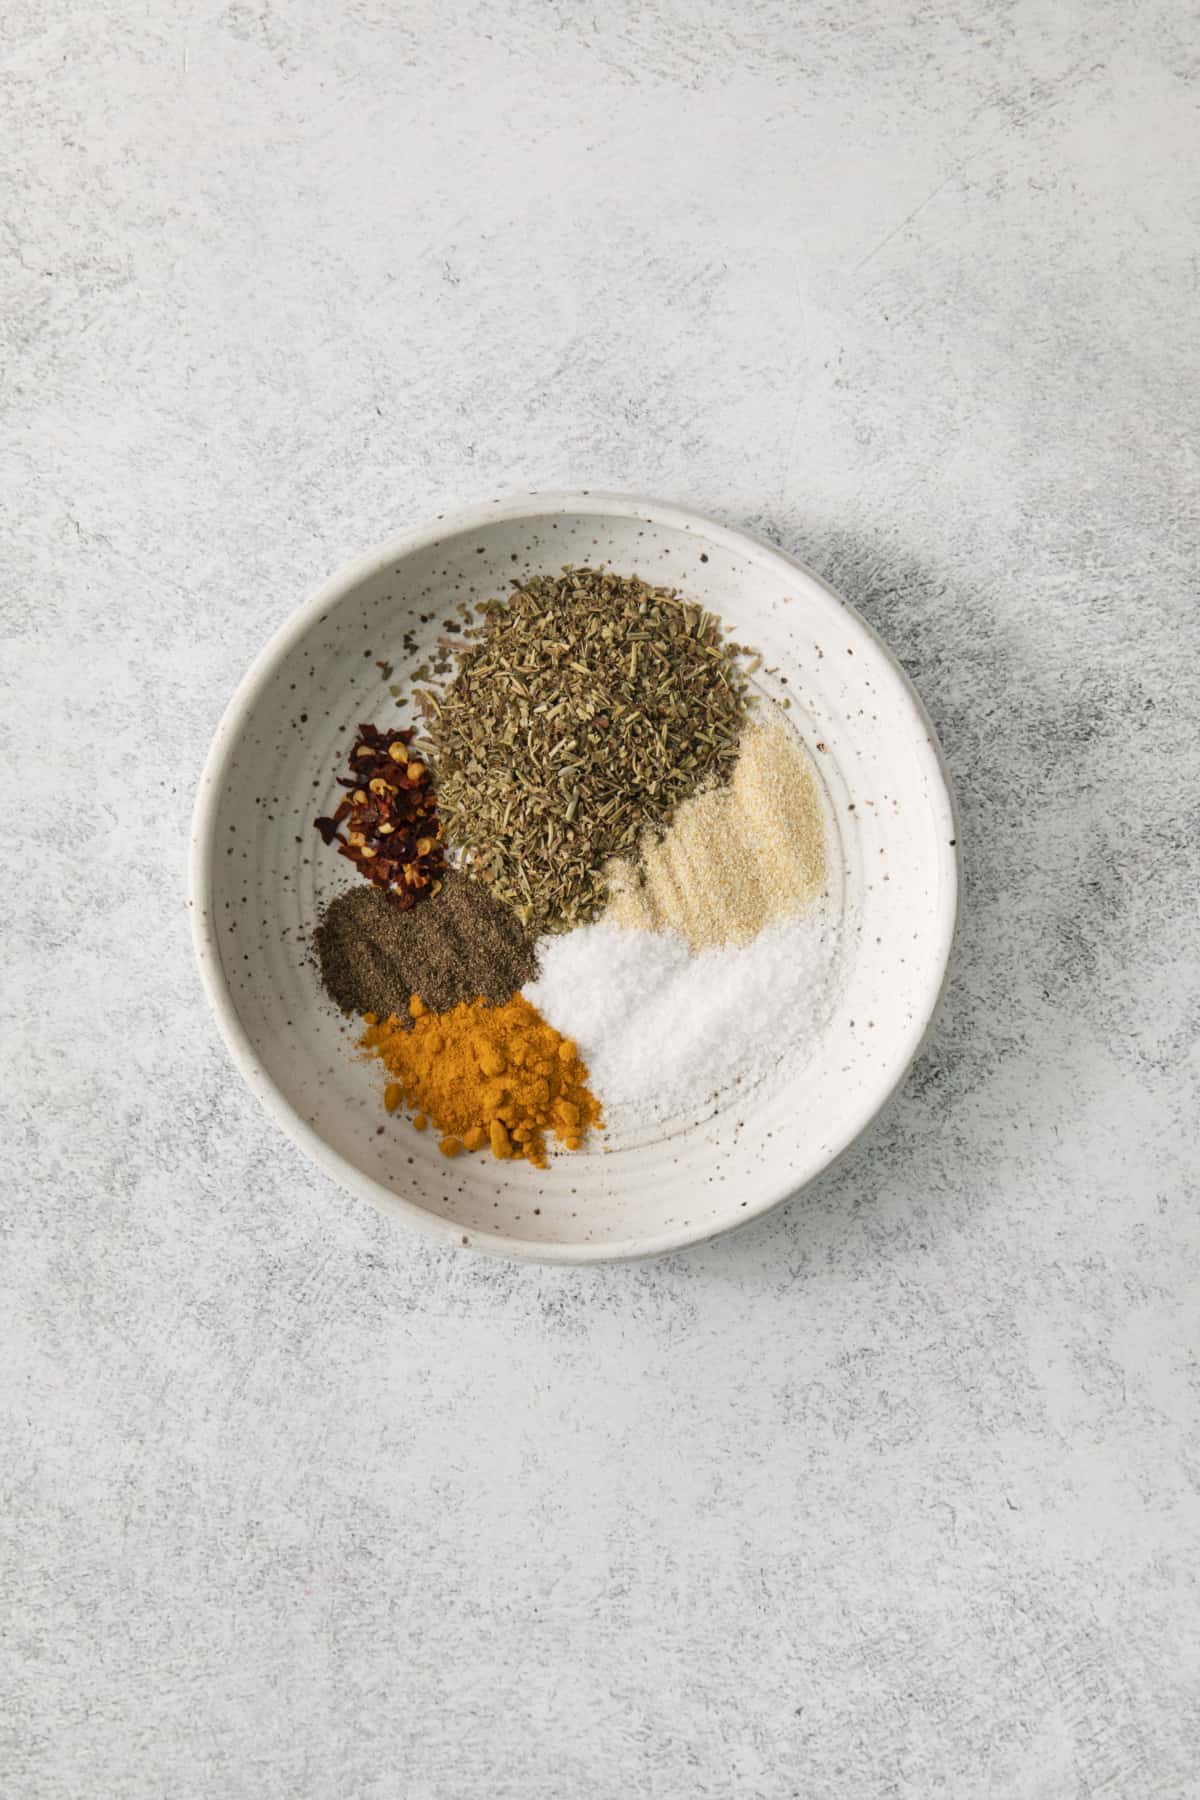 all spices for dry rub separate in a bowl.